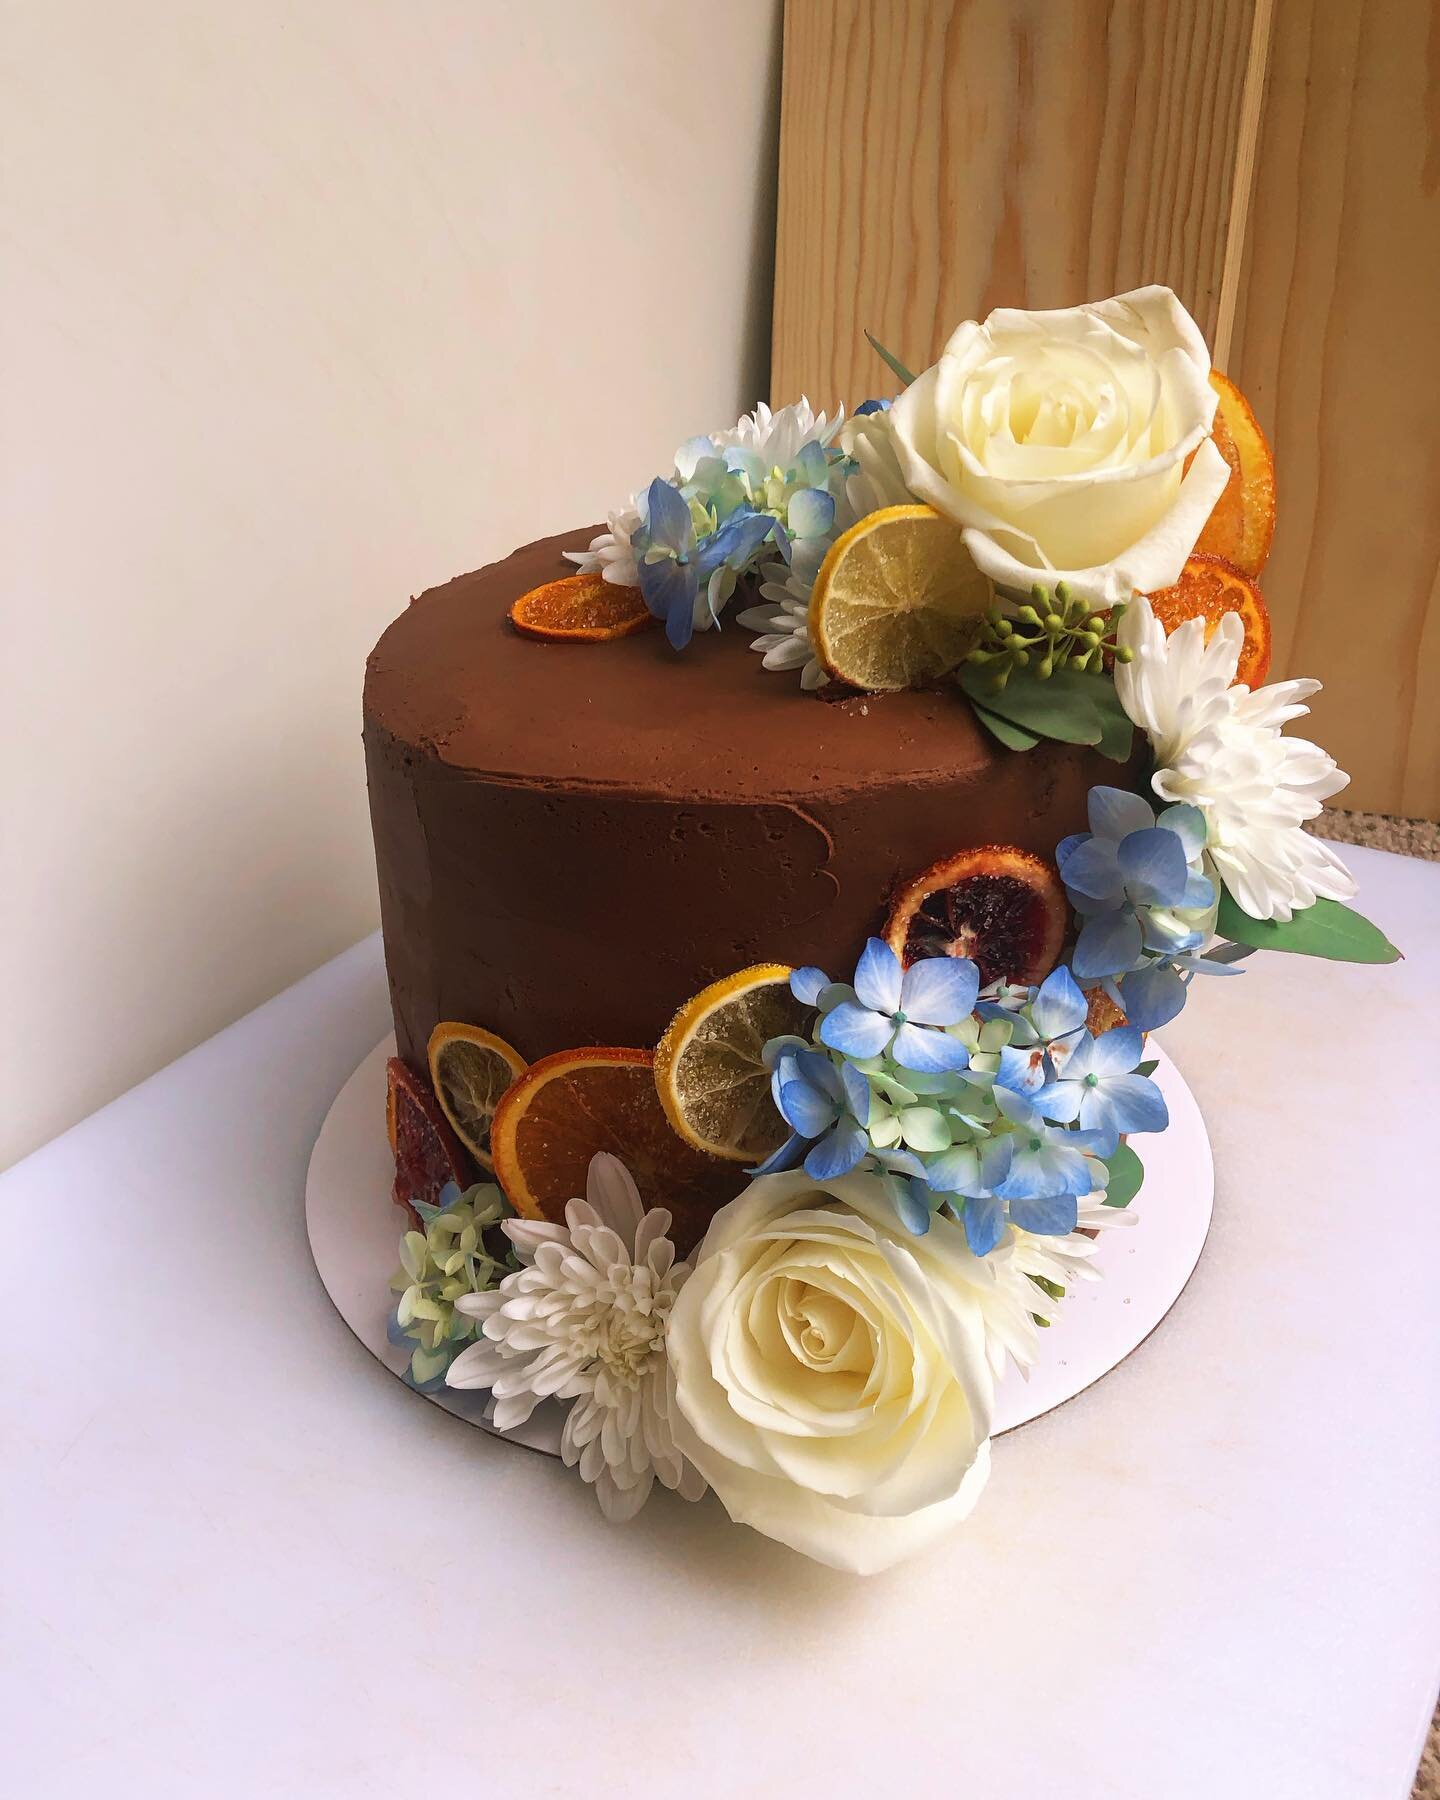 A bridal shower cake for some lovely friends.

Chocolate Cake, chocolate buttercream, citrus and blue theme.

#weddingcake #bridalshower #mombaker #citrus #chocolate #cake #roses